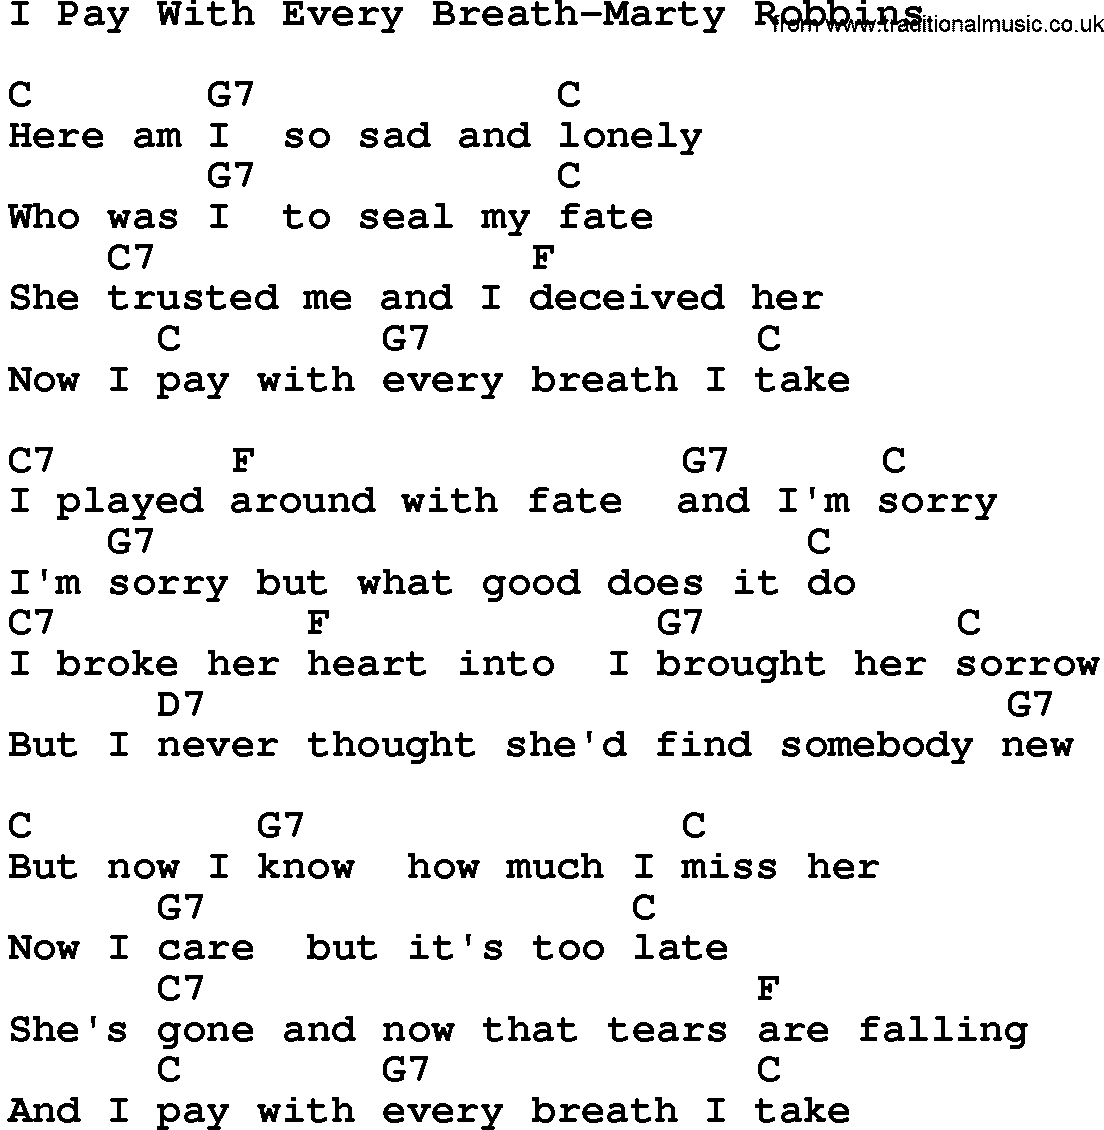 Country music song: I Pay With Every Breath-Marty Robbins lyrics and chords